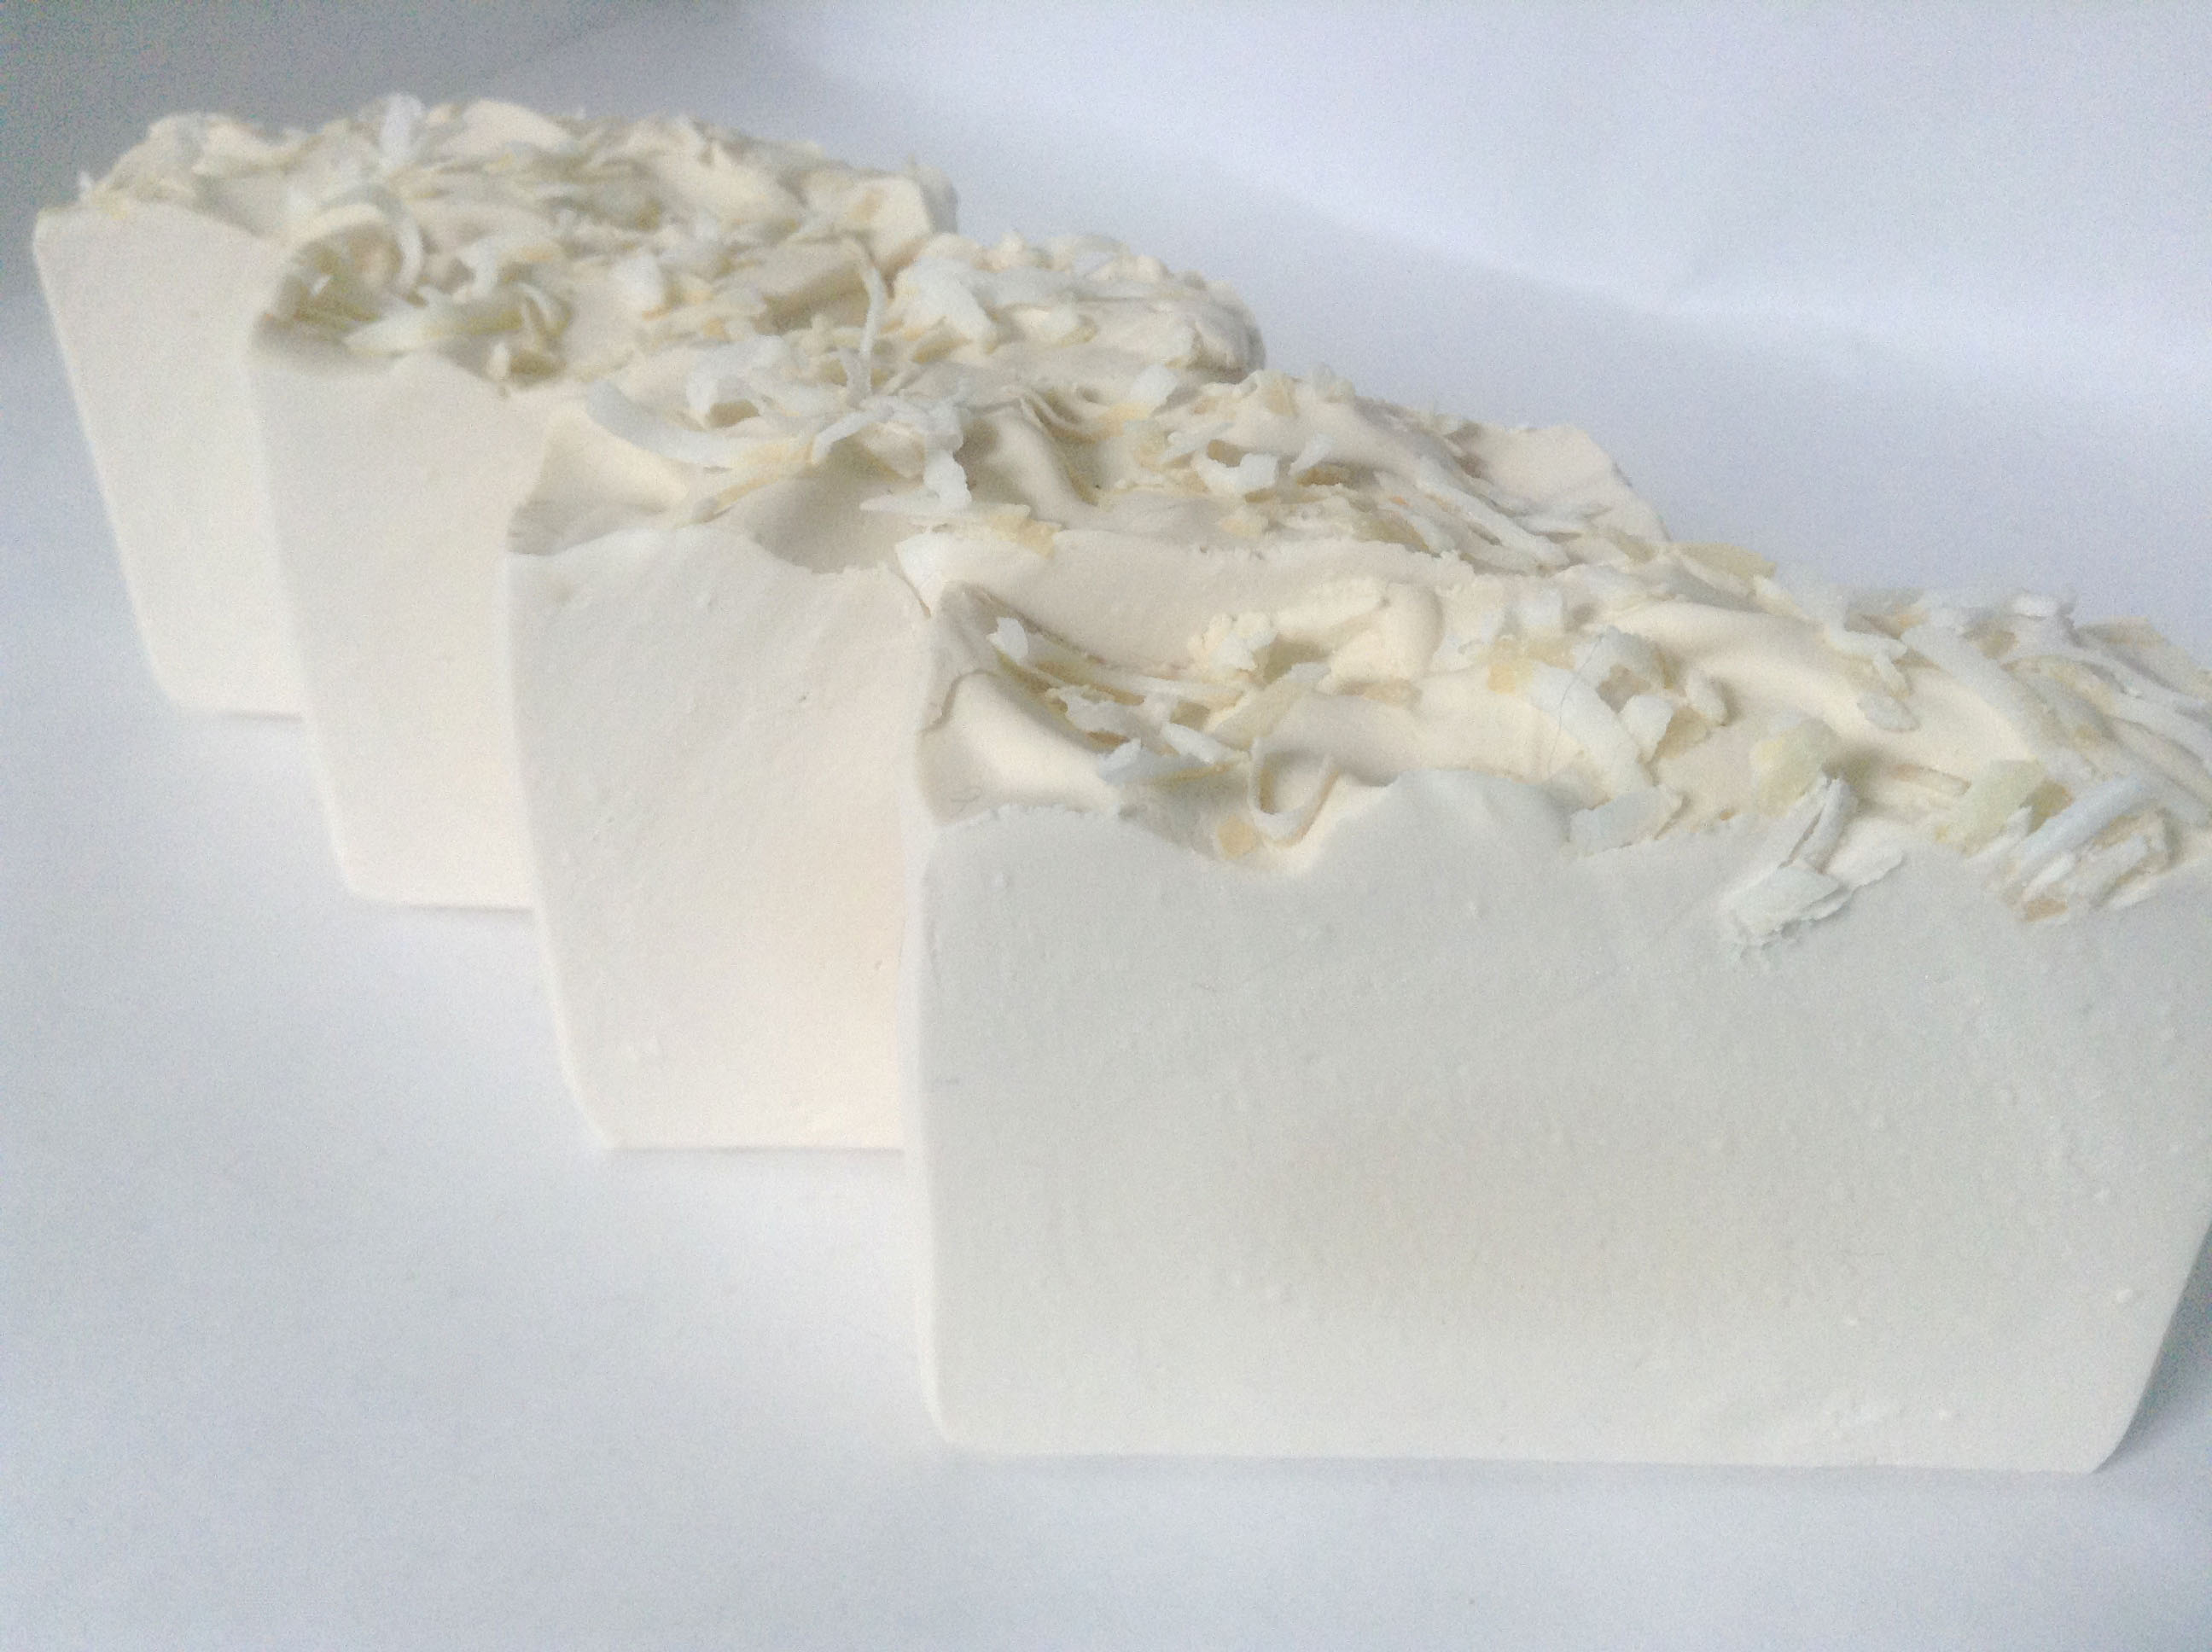 Is Creamy Lightly Colored Hot Process Goat's Milk Soap Possible?